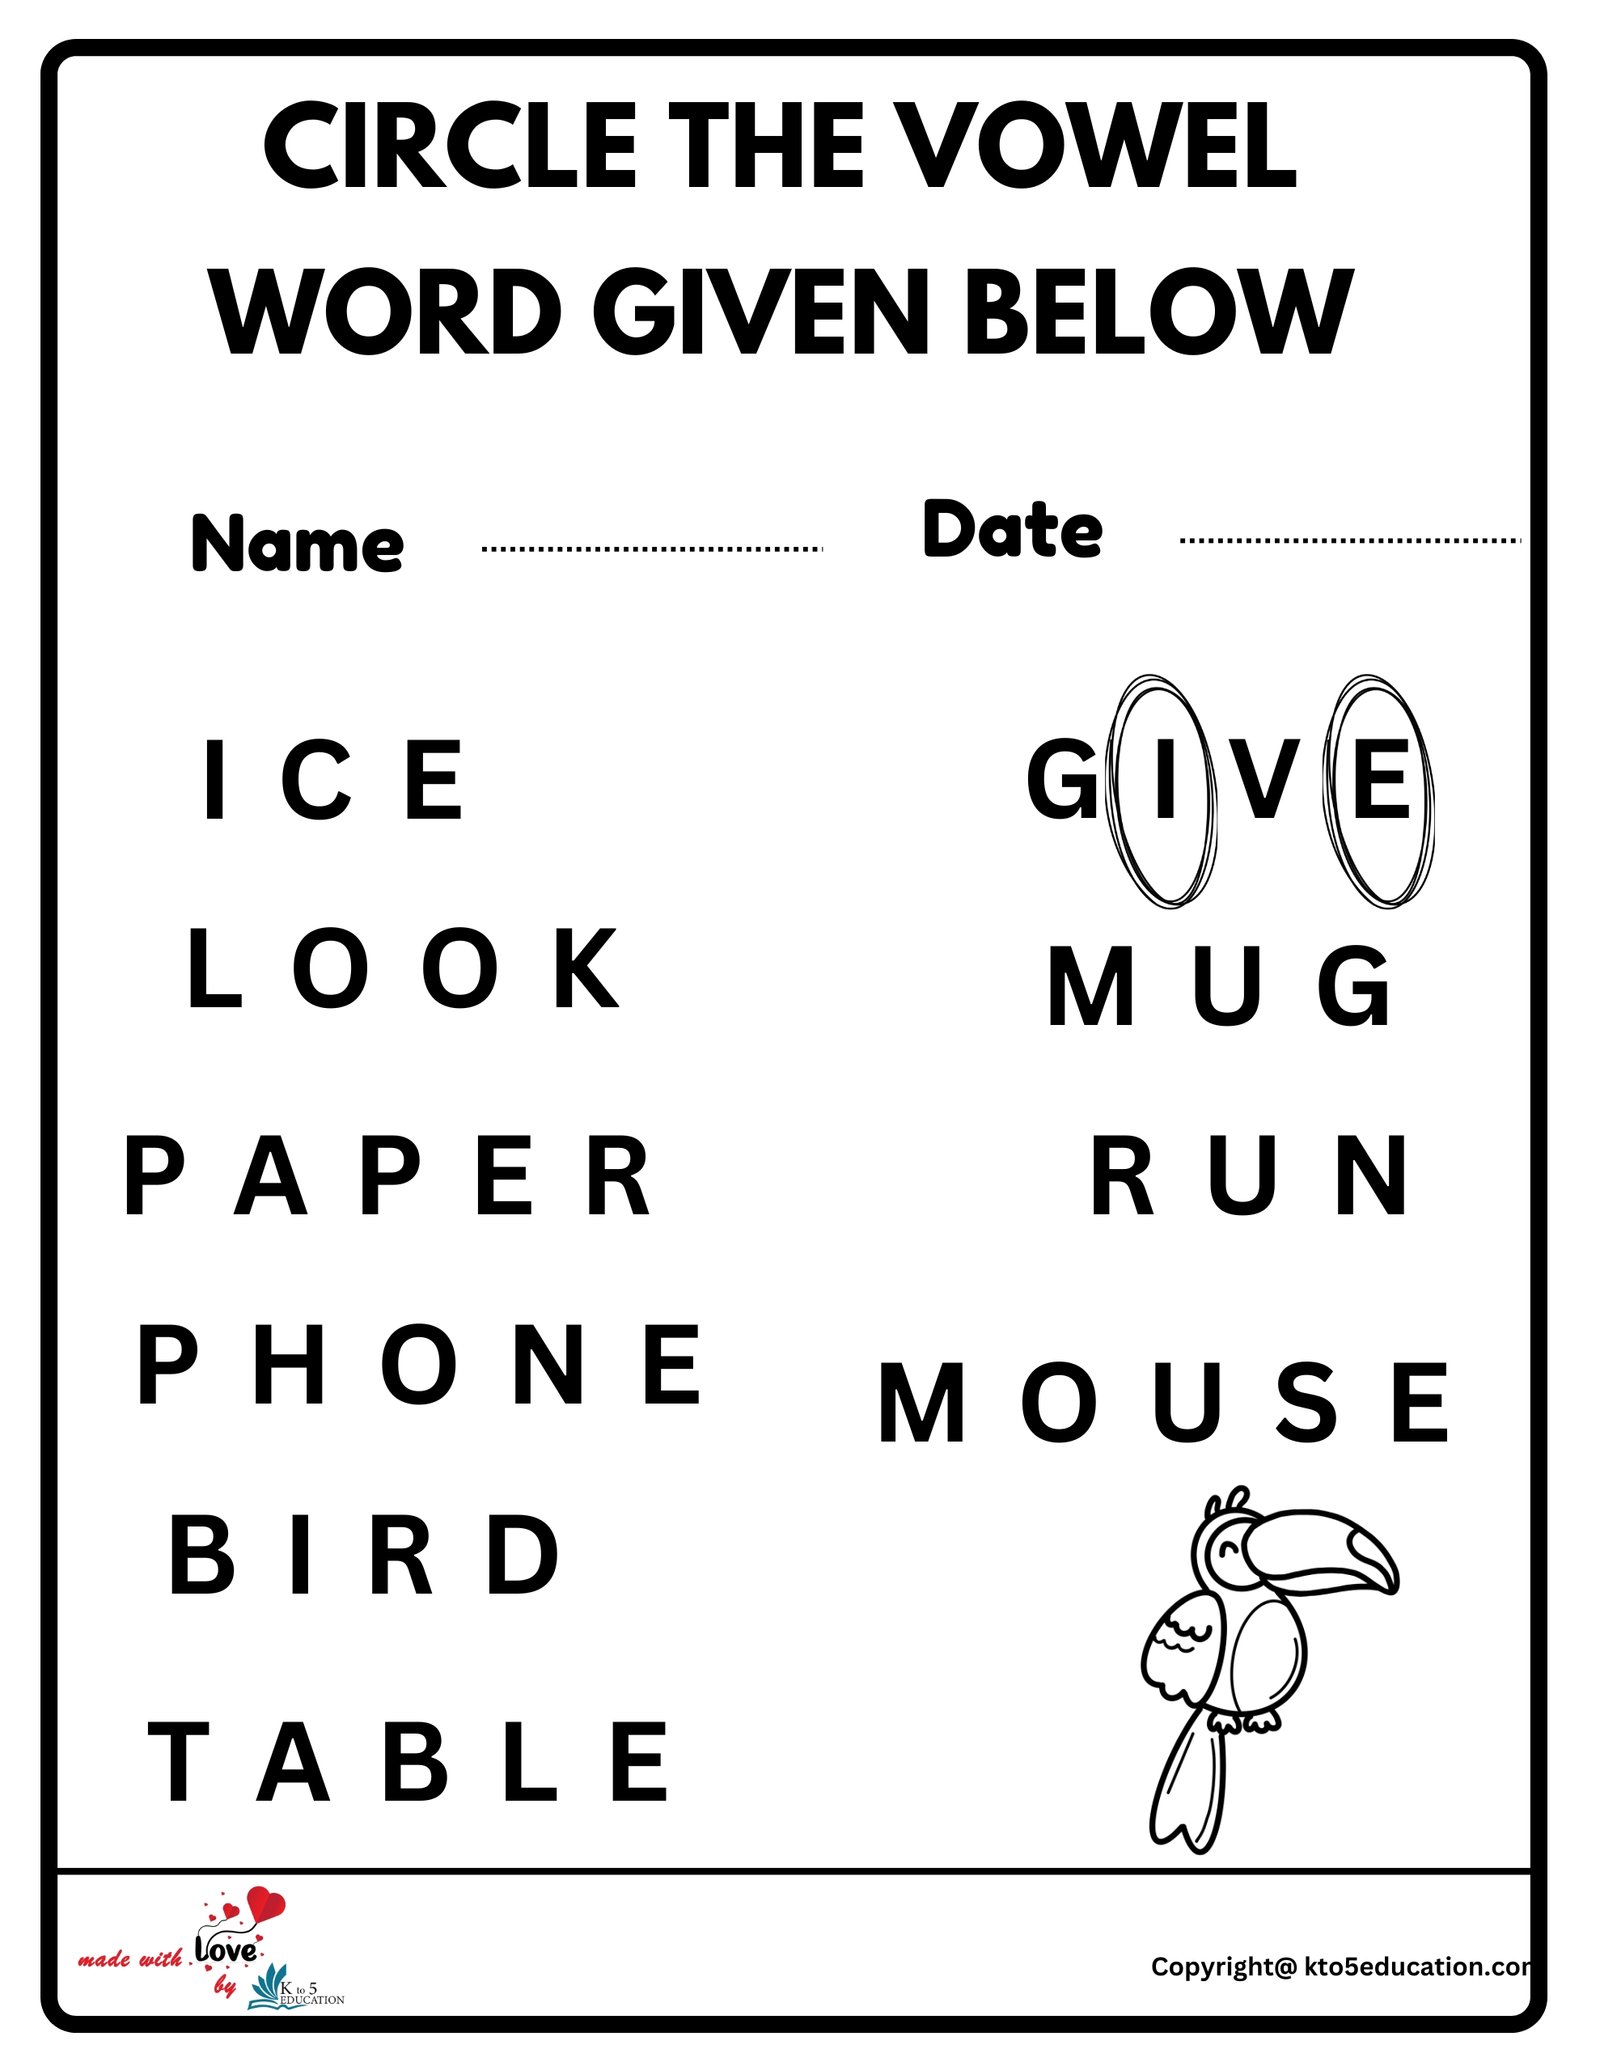 CIRCLE THE VOWEL WORD GIVEN BELOW